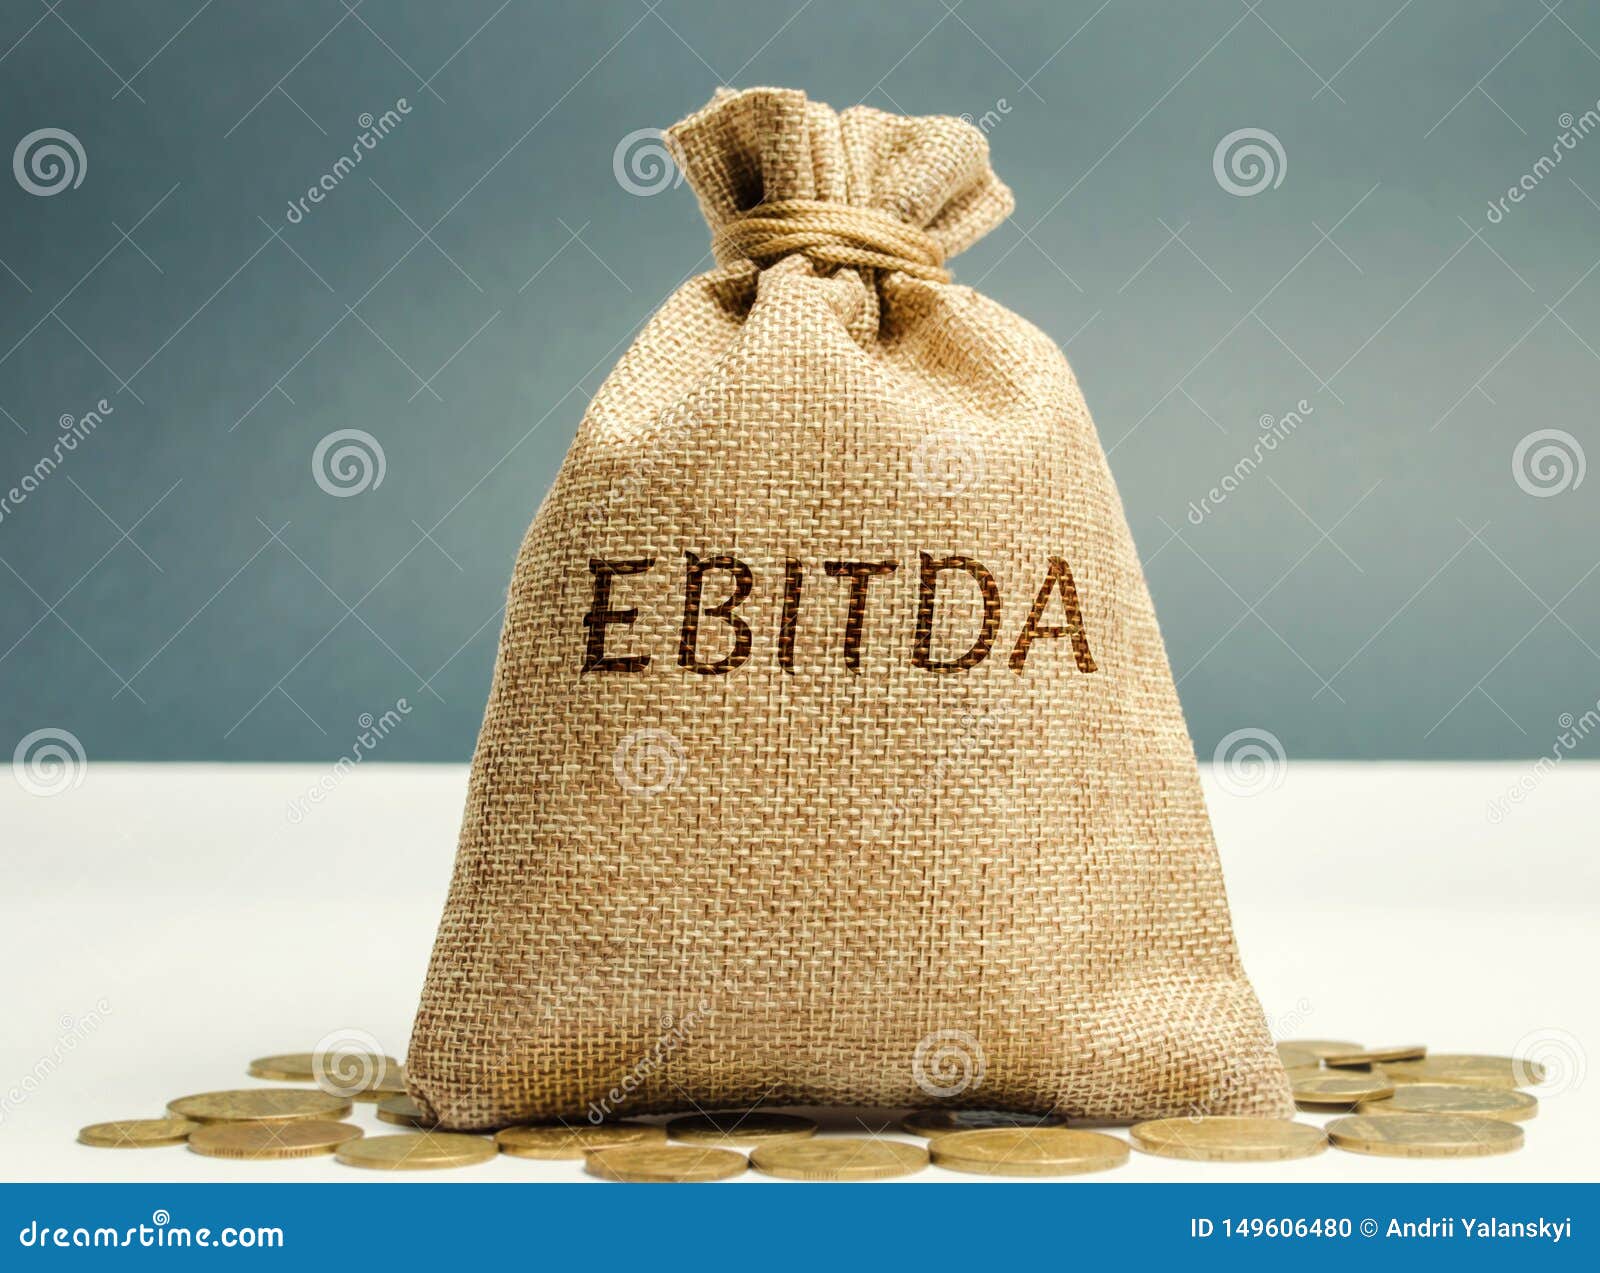 money bag with the word ebitda. earnings before interest, taxes, depreciation and amortization. financial result of the company.